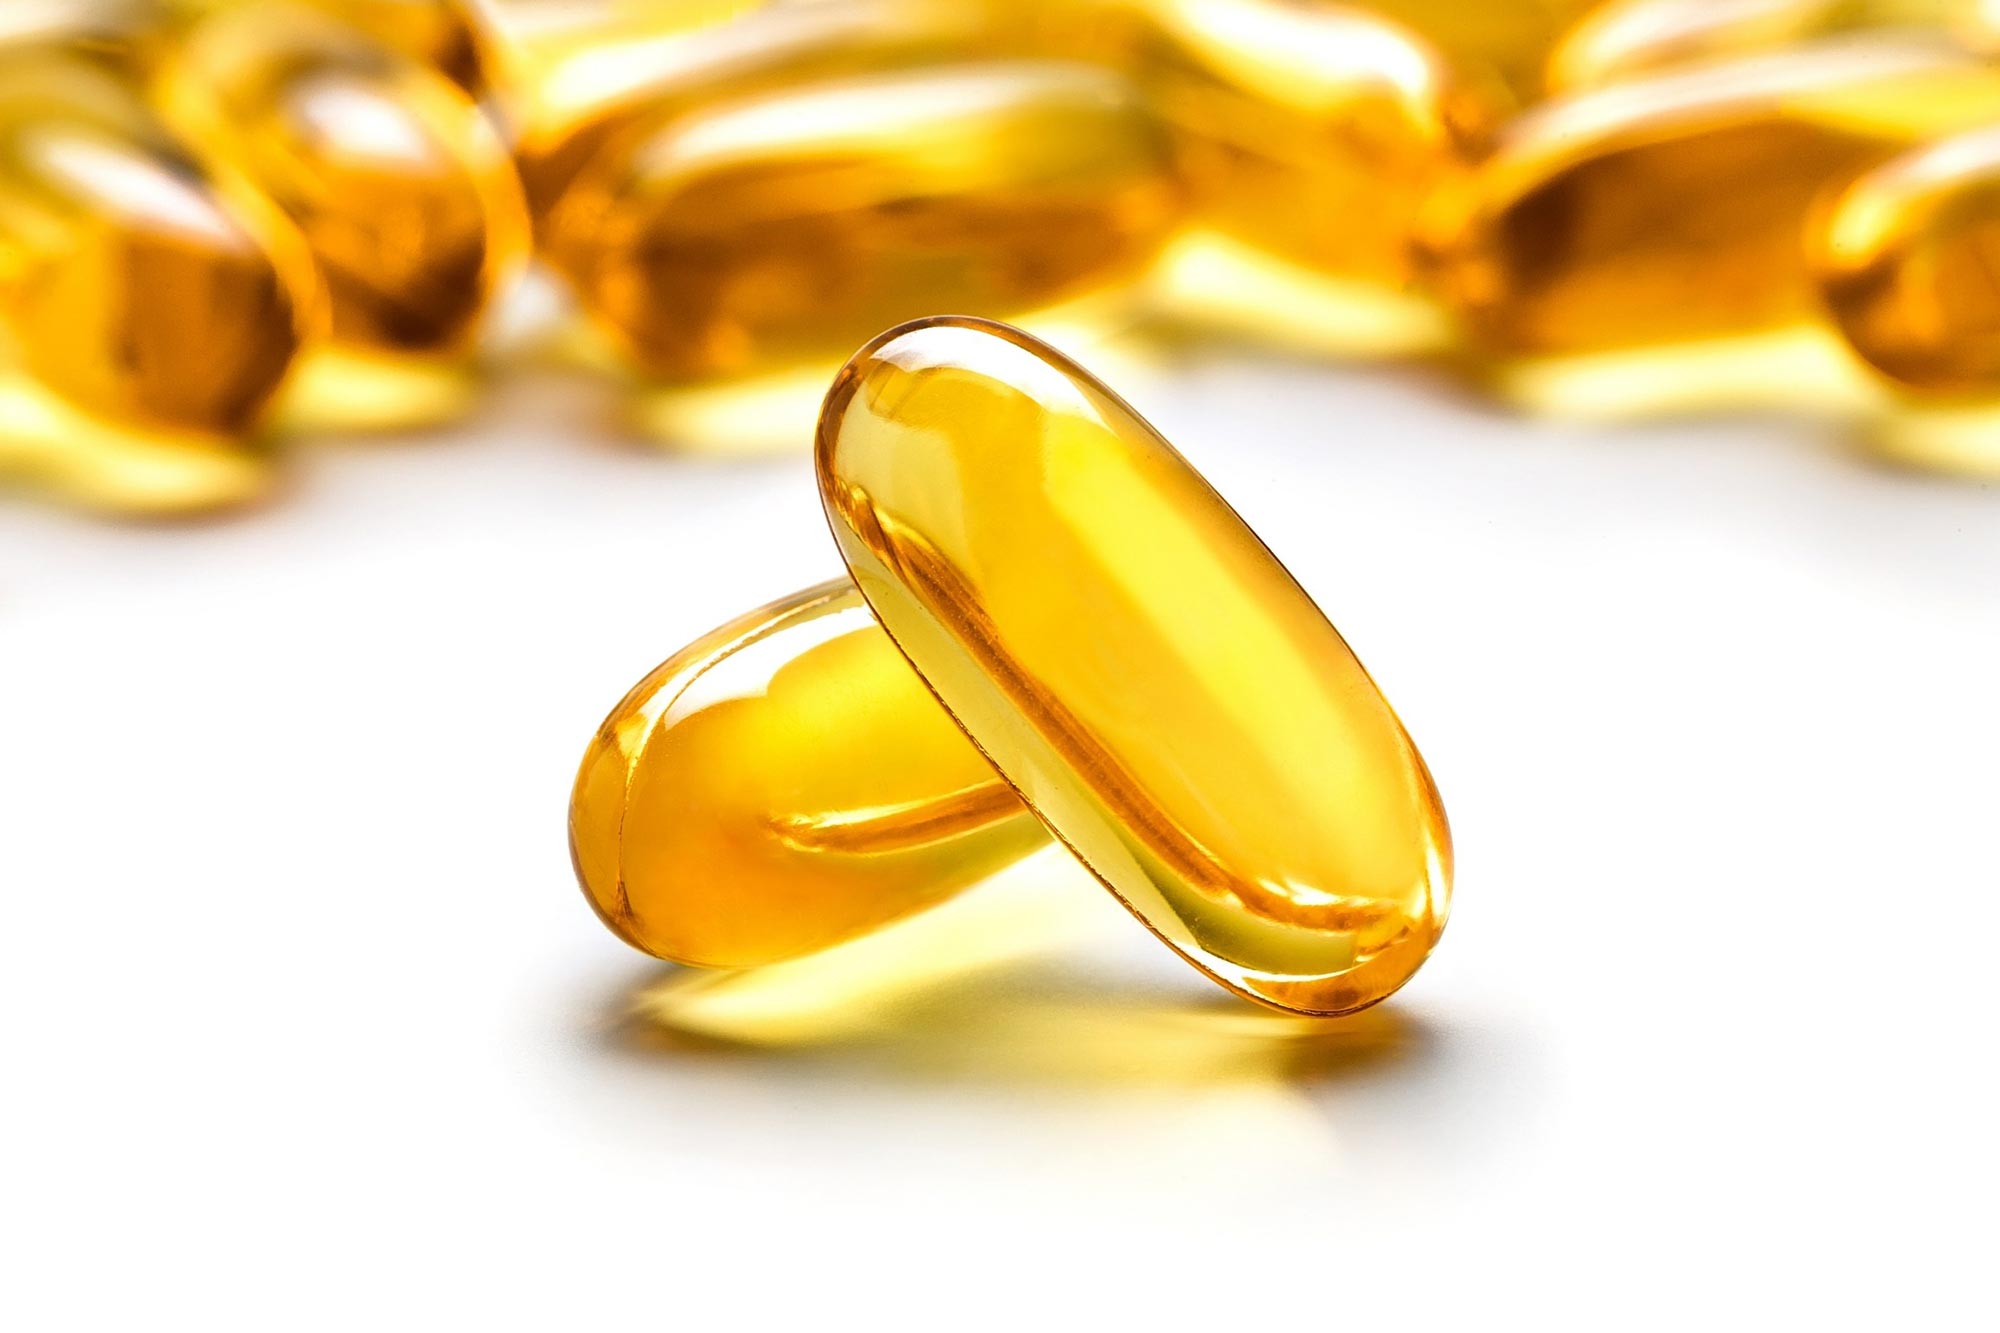 Vitamin D and Fish Oil Supplements May Reduce Risk of Autoimmune Disease – Rheumatoid Arthritis, Psoriasis, and Thyroid - SciTechDaily